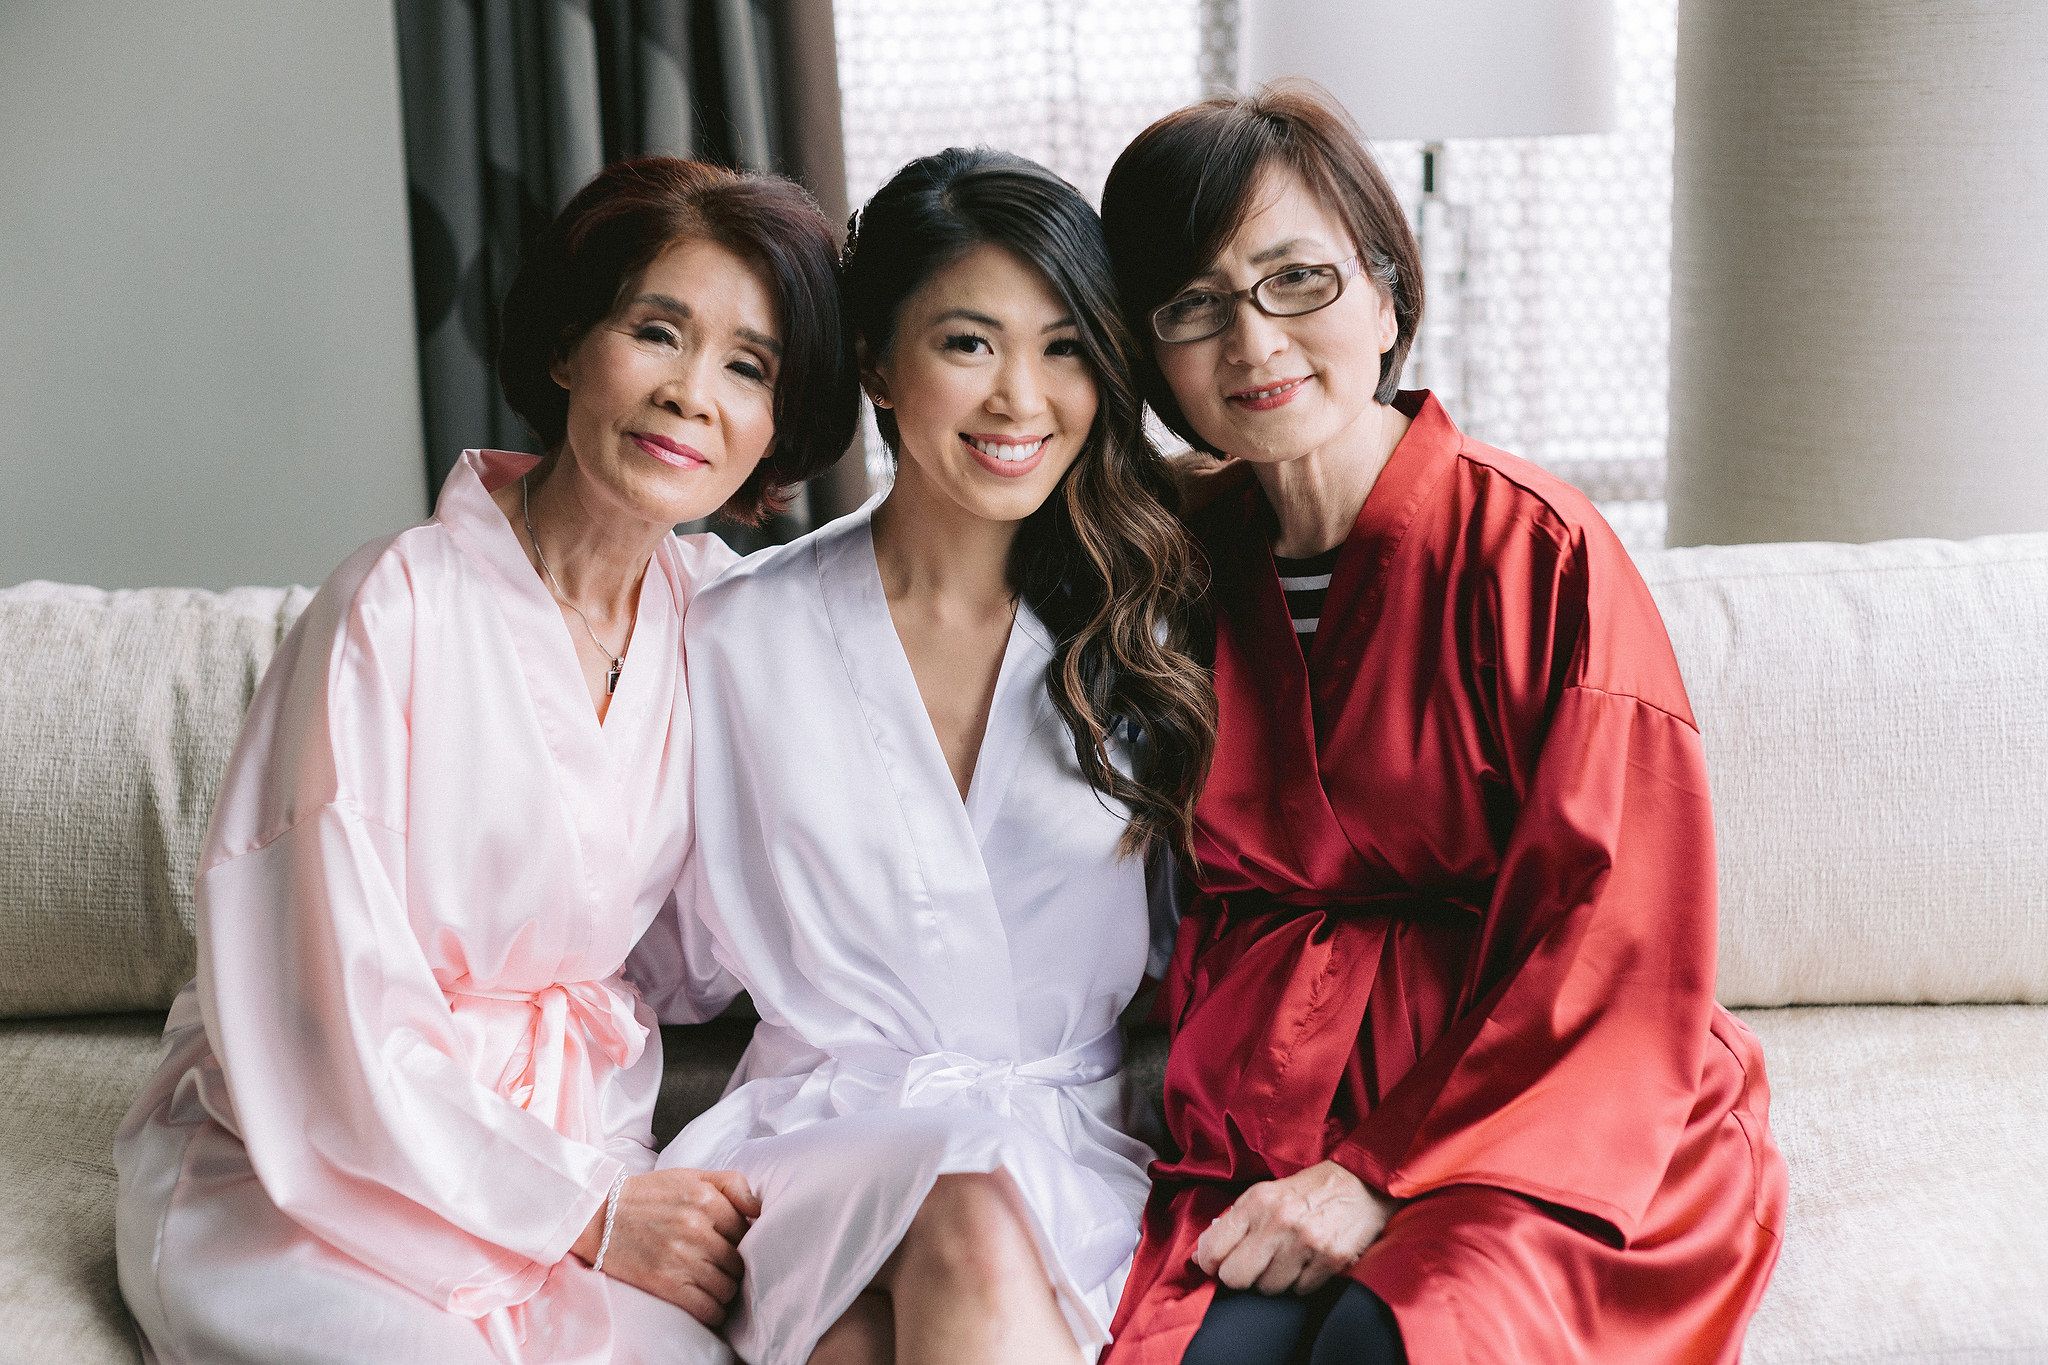 The bride is wearing her robe, while the two ladies with her are wearing red and pink robes. Love month wedding image by Jenny Fu Studio.